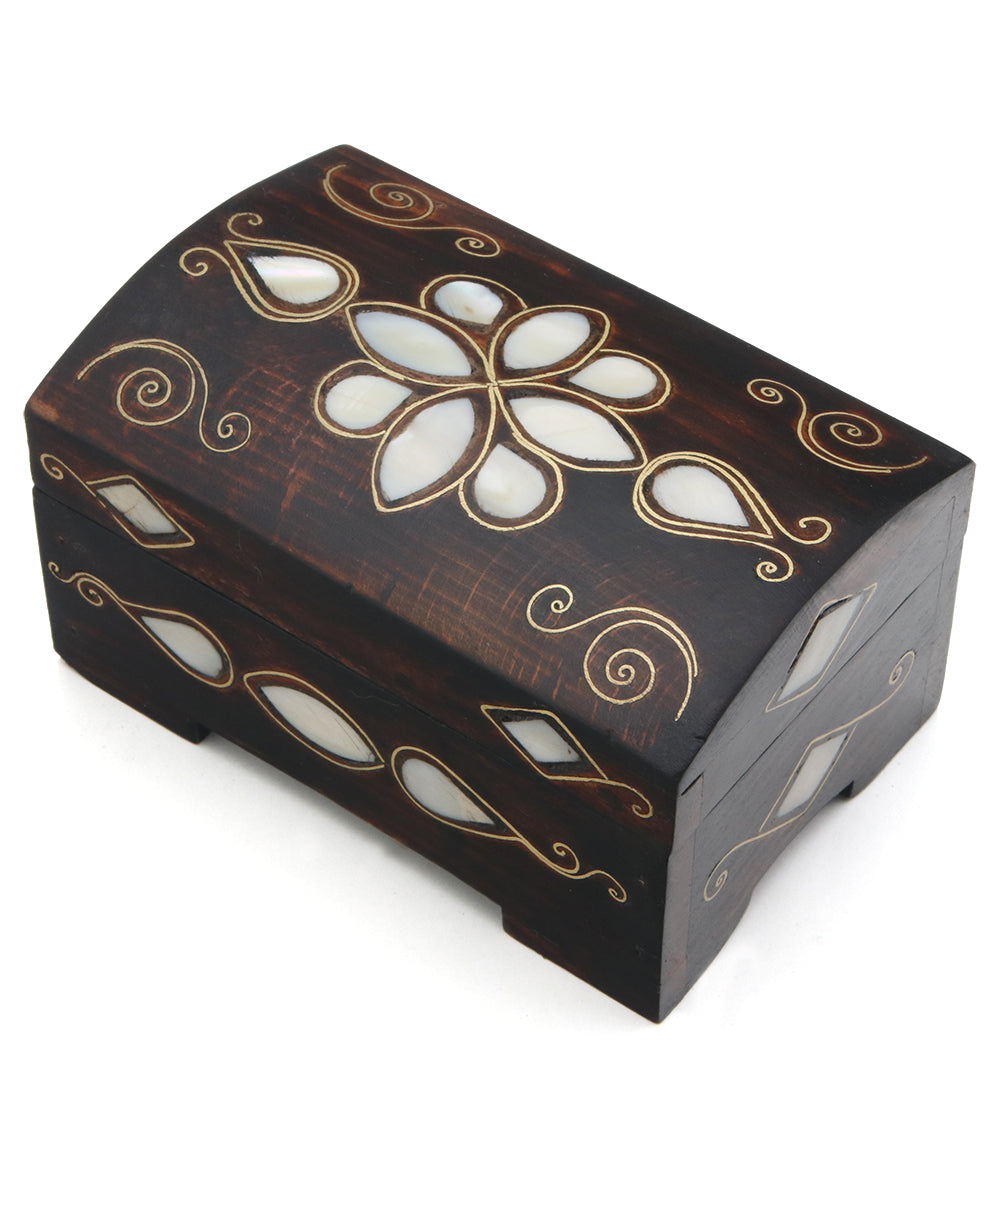 NOVICA Om Protector Hand Carved Wood Puzzle Box Om Symbol from Indonesia